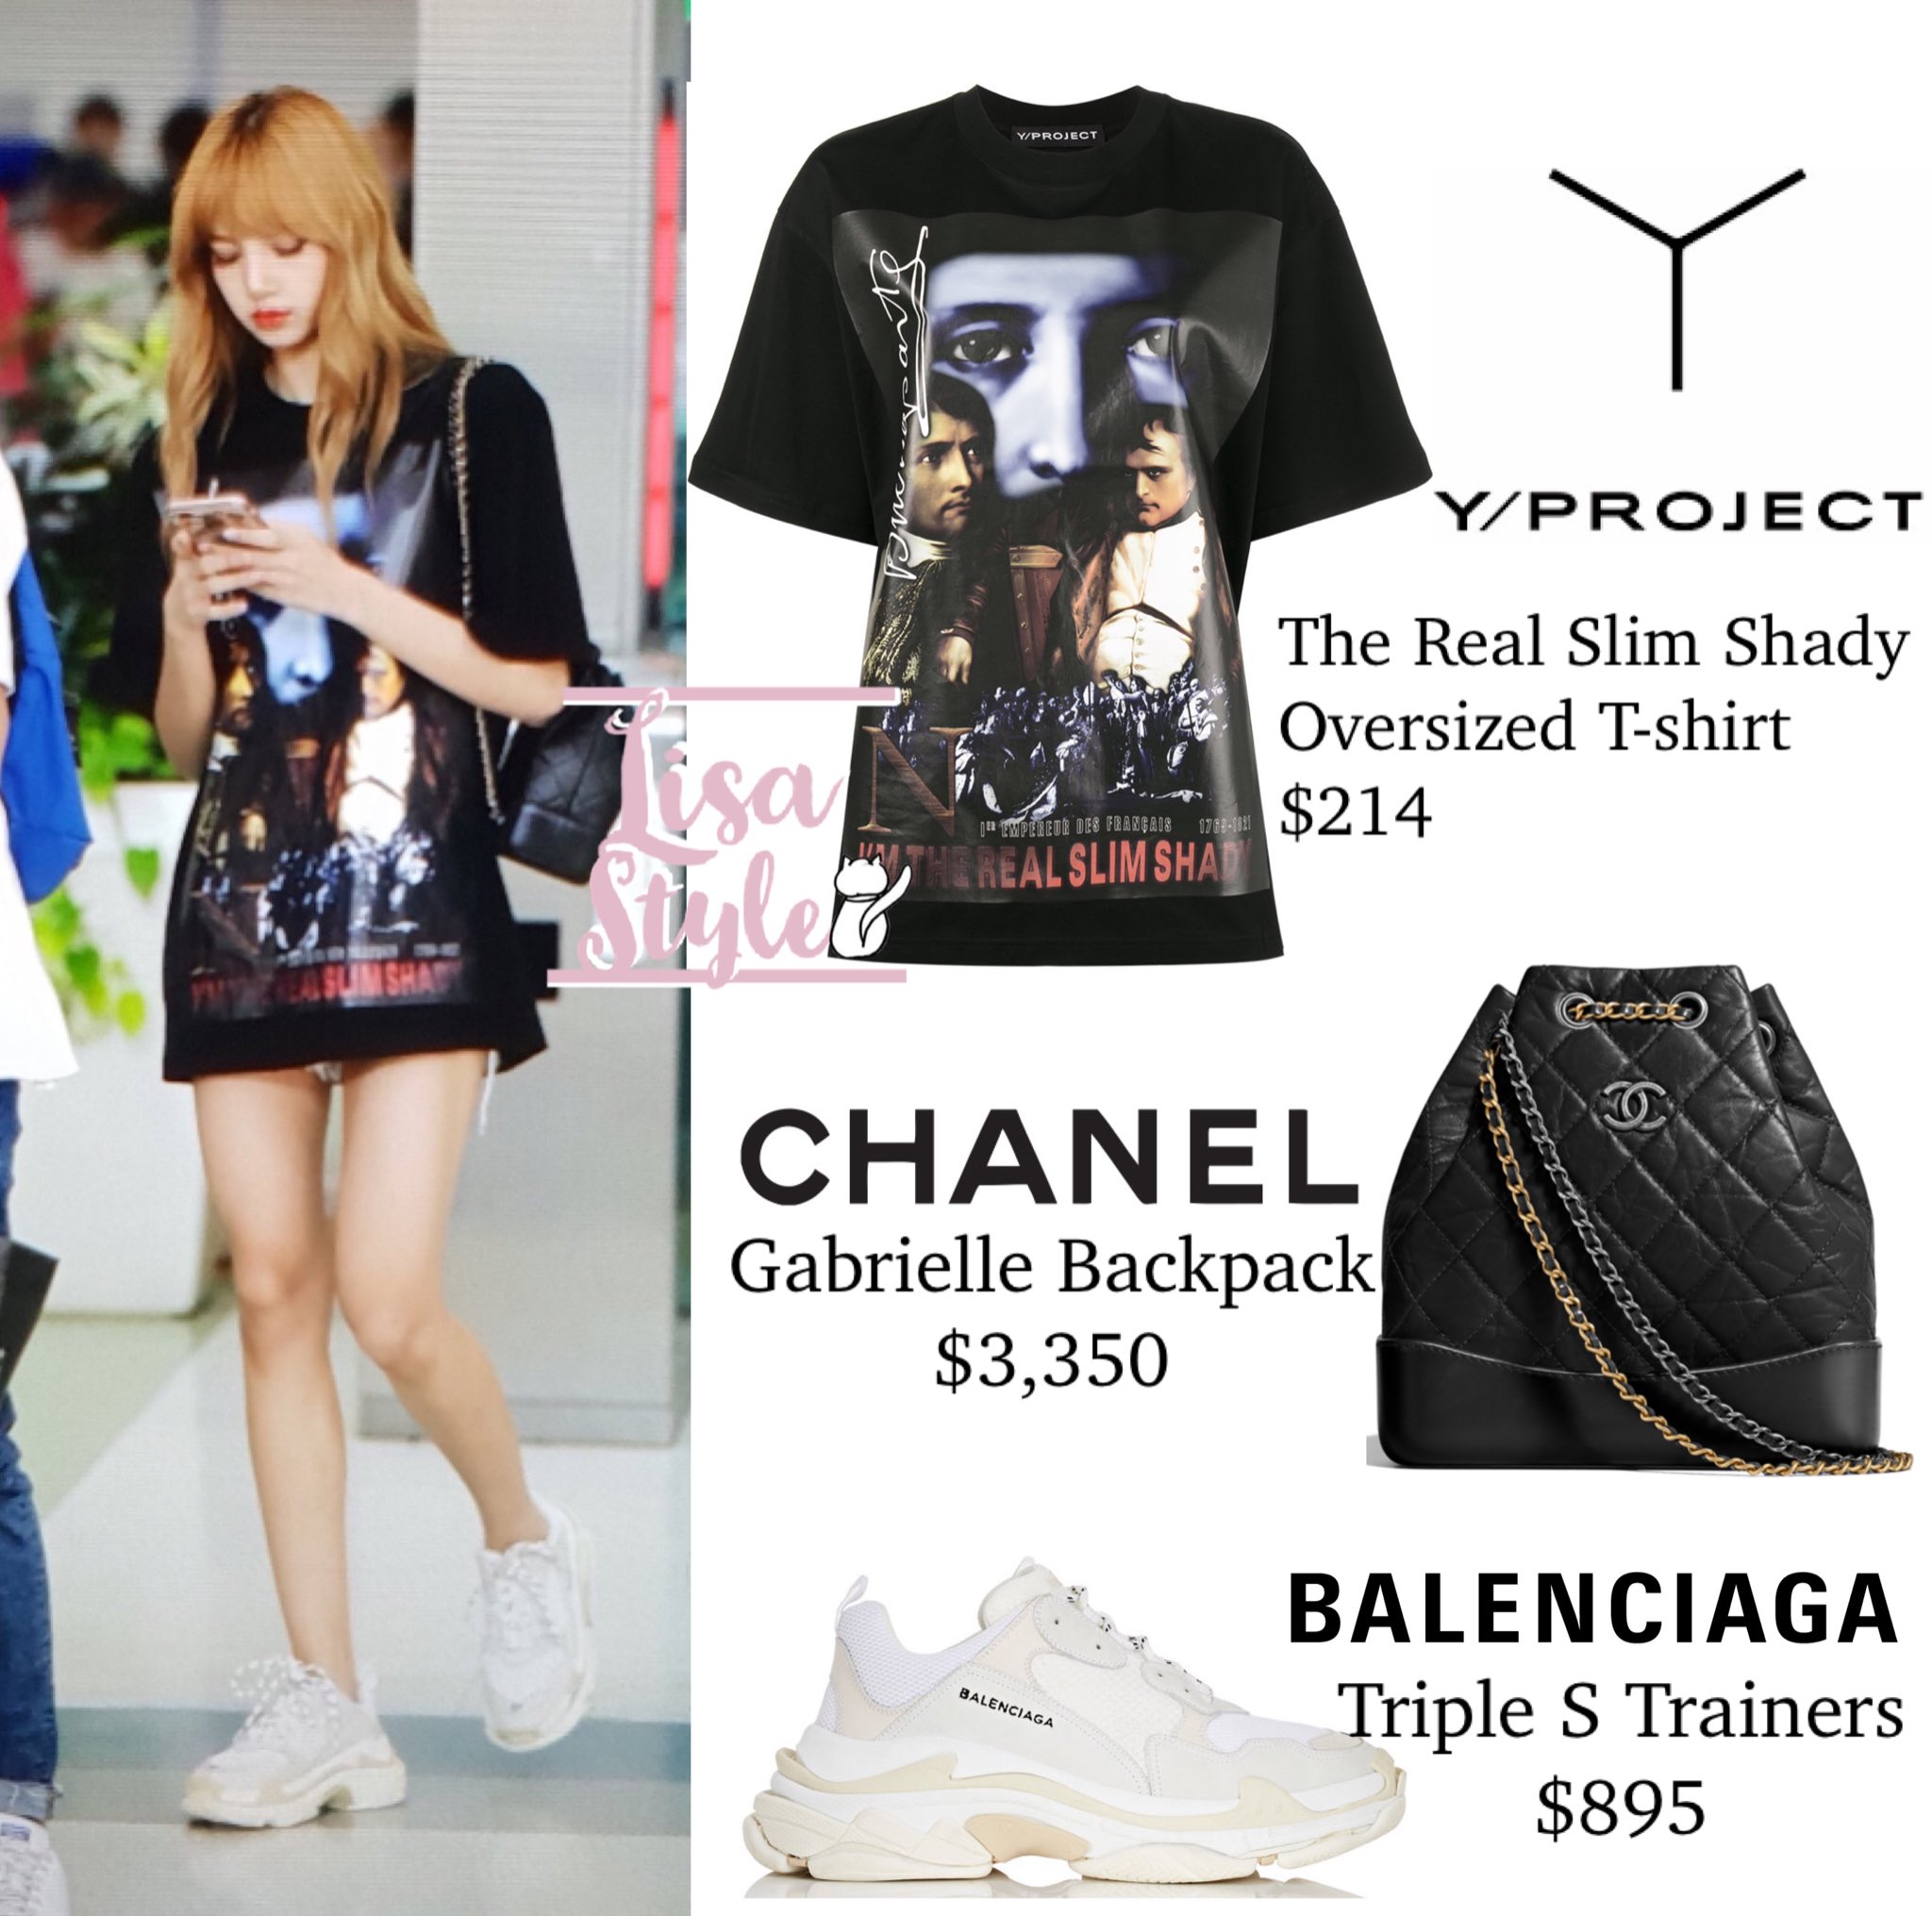 LISA'S AIRPORT FASHION | allkpop Forums